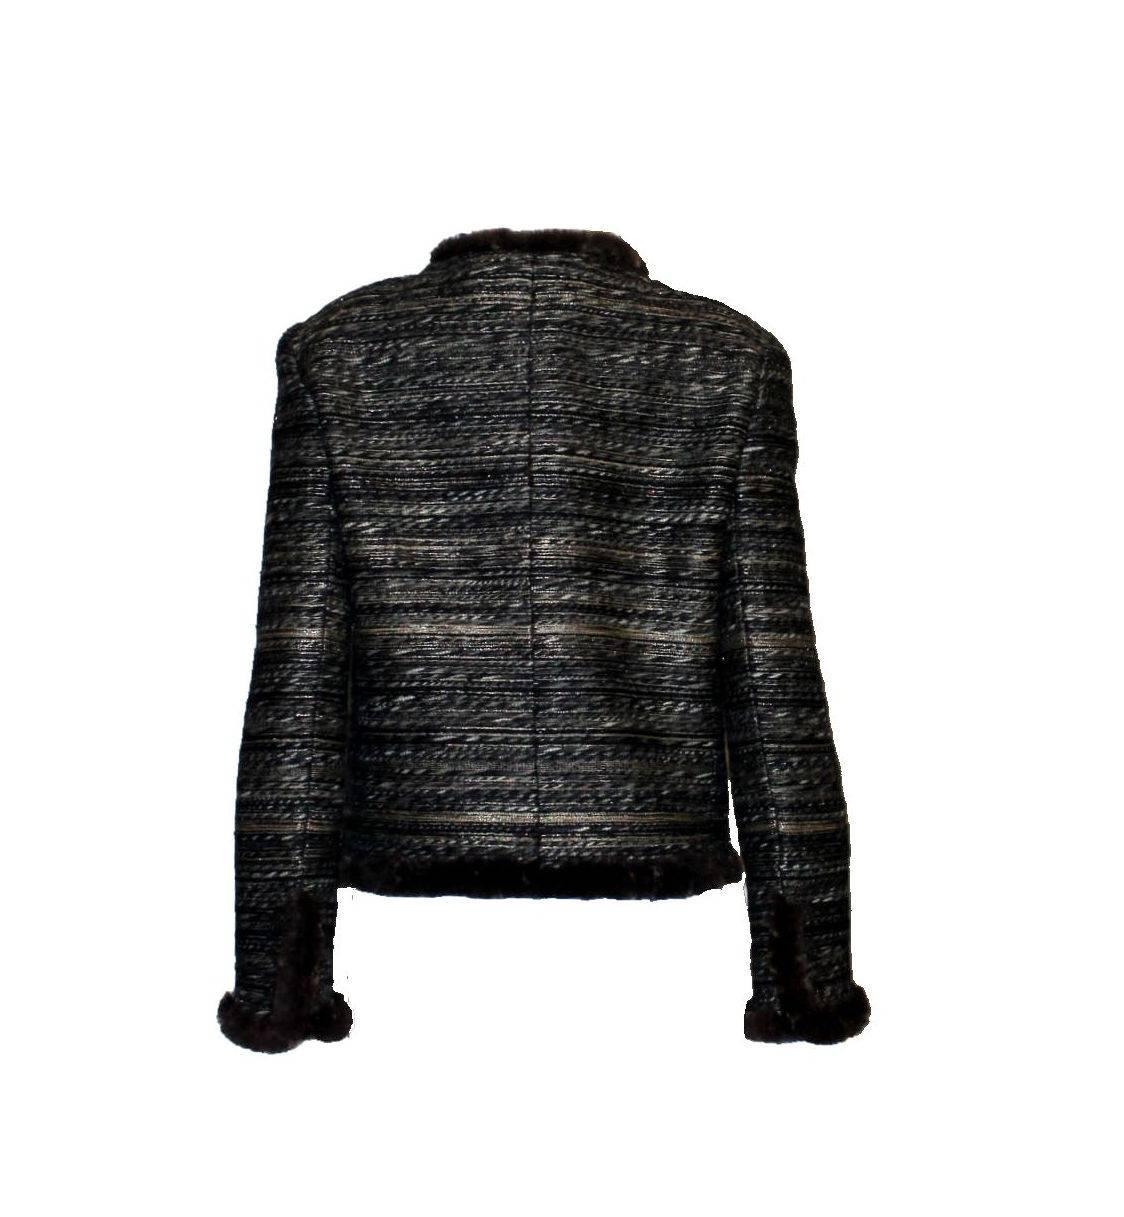 Beautiful CHANEL fantasy tweed jacket 
A true CHANEL signature item that will last you for many years
Closes in front with concealed hooks
Amazing metallic tweed fabric
Beautiful CC Chanel signature buttons on sleeves with real button holes 
Trimmed